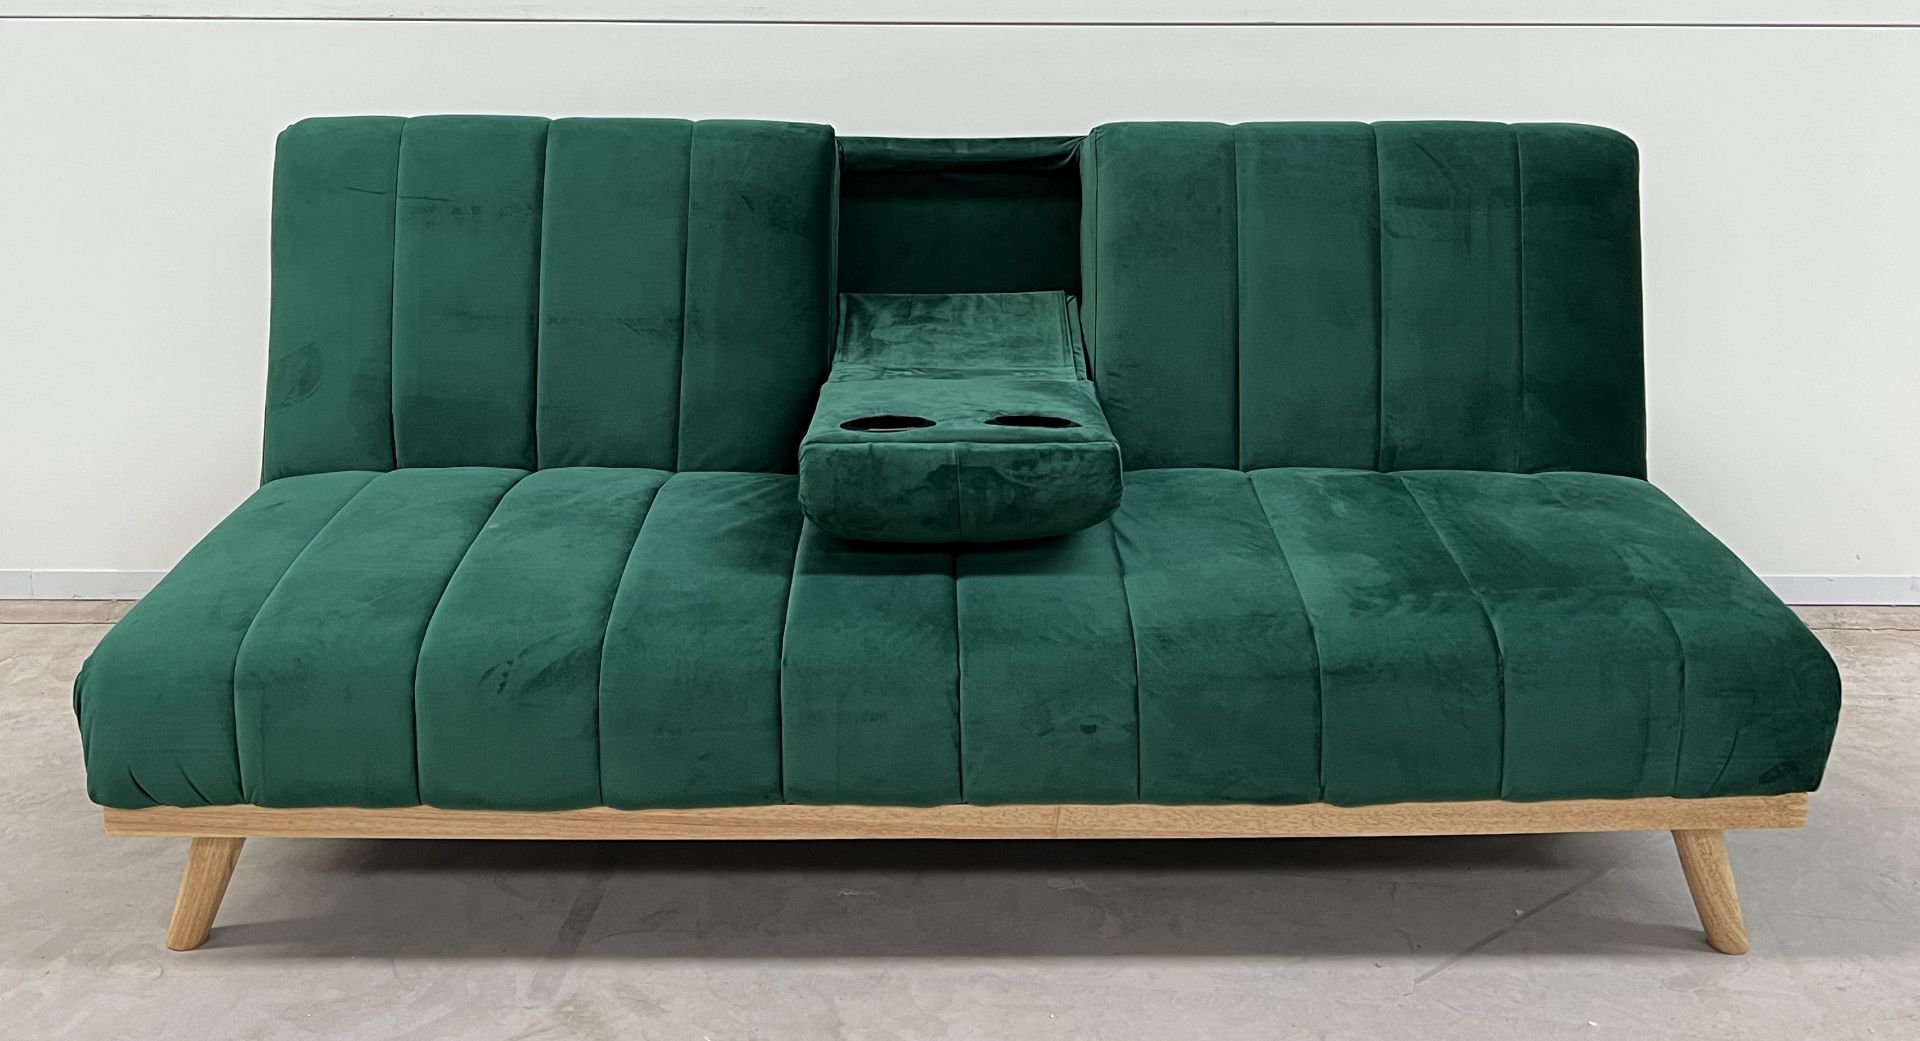 Etta Green Velvet 3 Seater Fold Down Sofa Bed Combines An Exciting Contemporary Shape With - Image 2 of 4